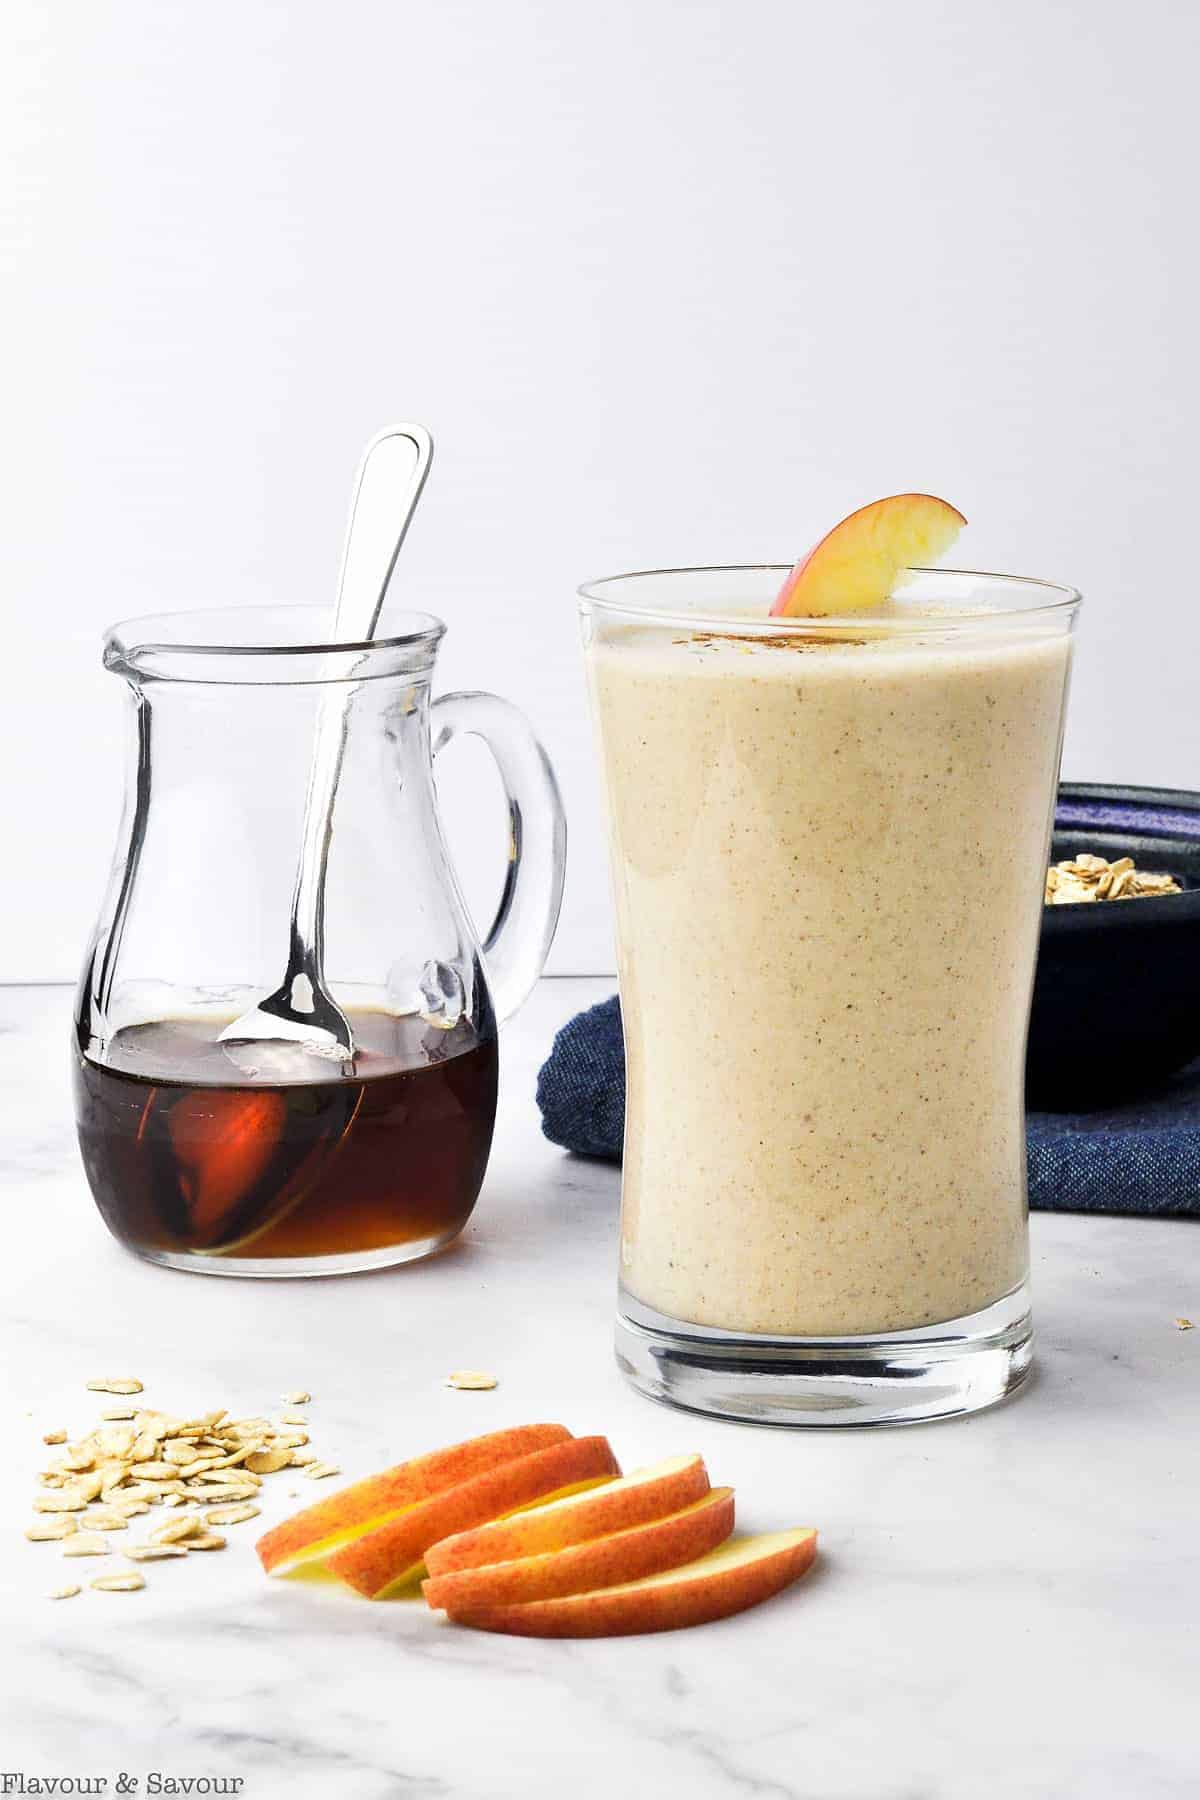 apple oatmeal breakfast smoothie with apple slices and a pitcher of maple syrup nearby.